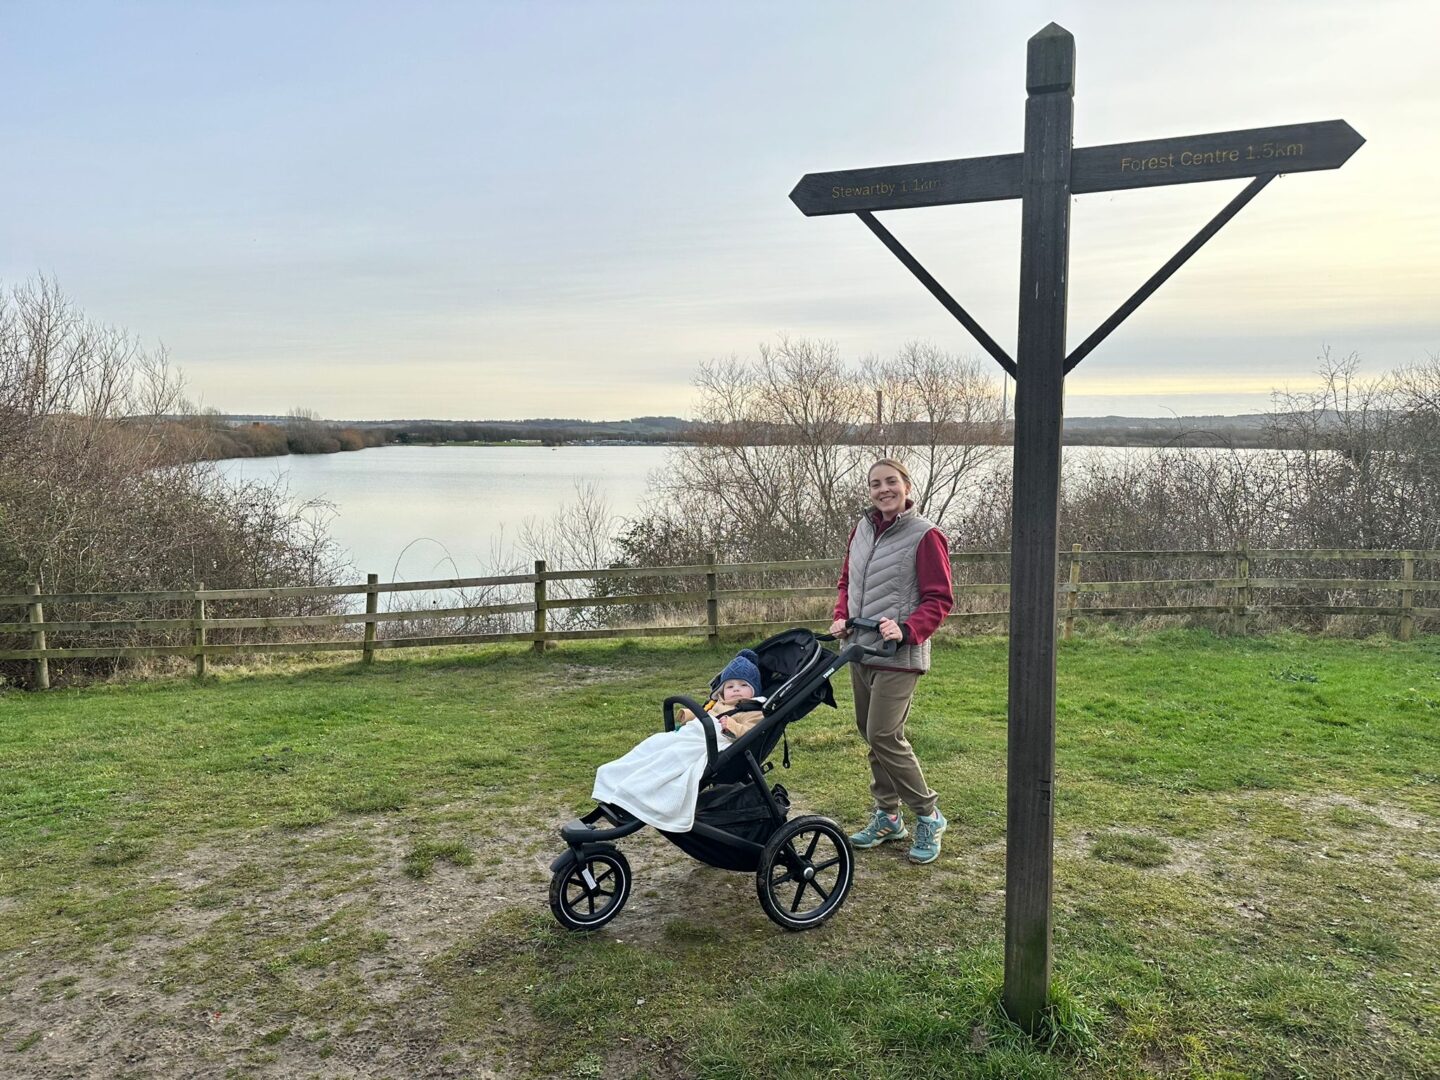 Woman pushing an off-road buggy with a baby in it stands on the grass by a wooden sign. Behind them is a lake. 